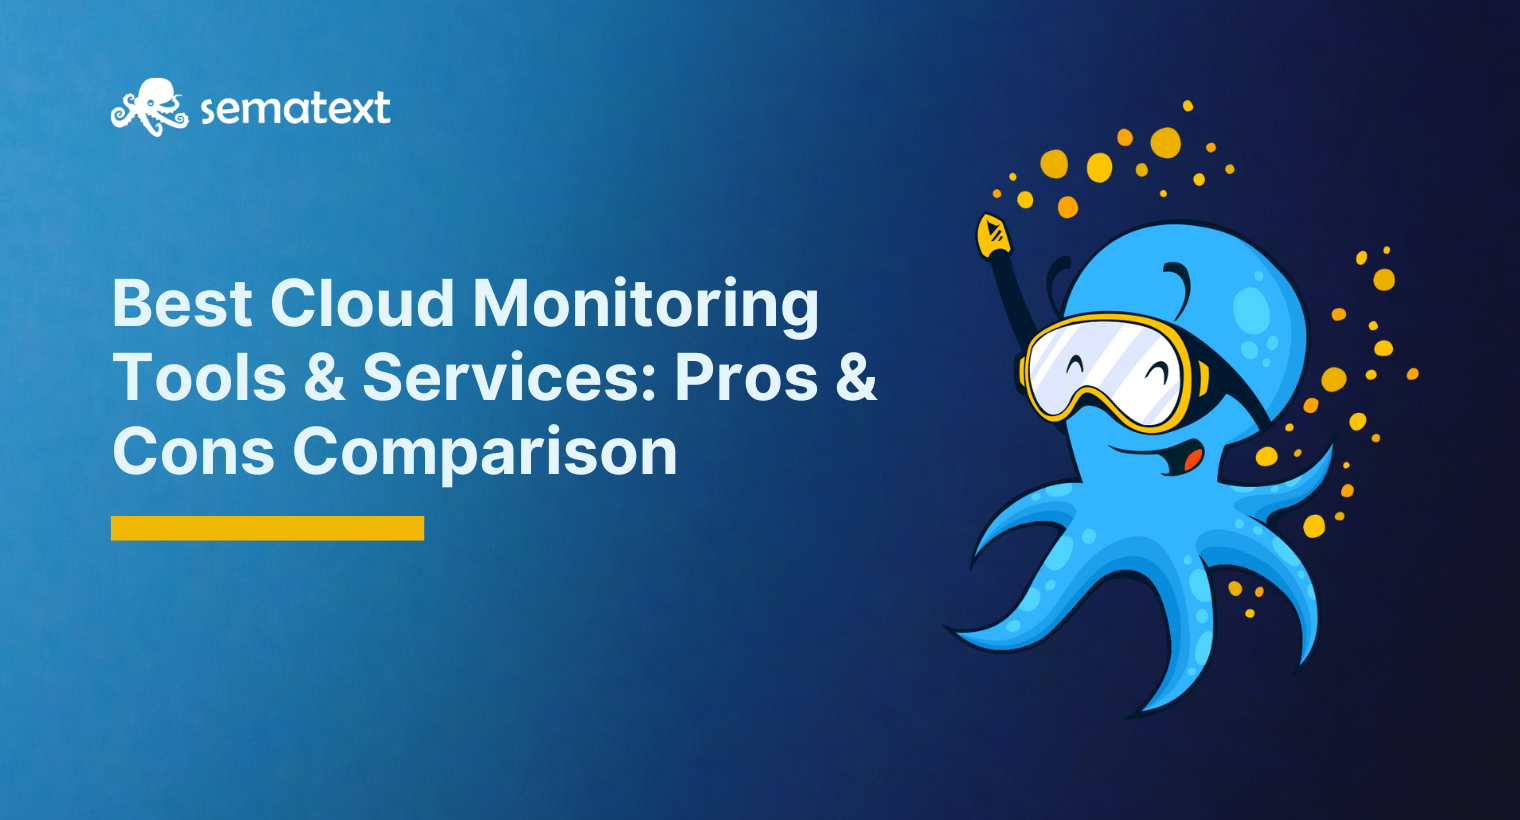 20 Best Cloud Monitoring Tools & Services in 2022: Pros & Cons Comparison